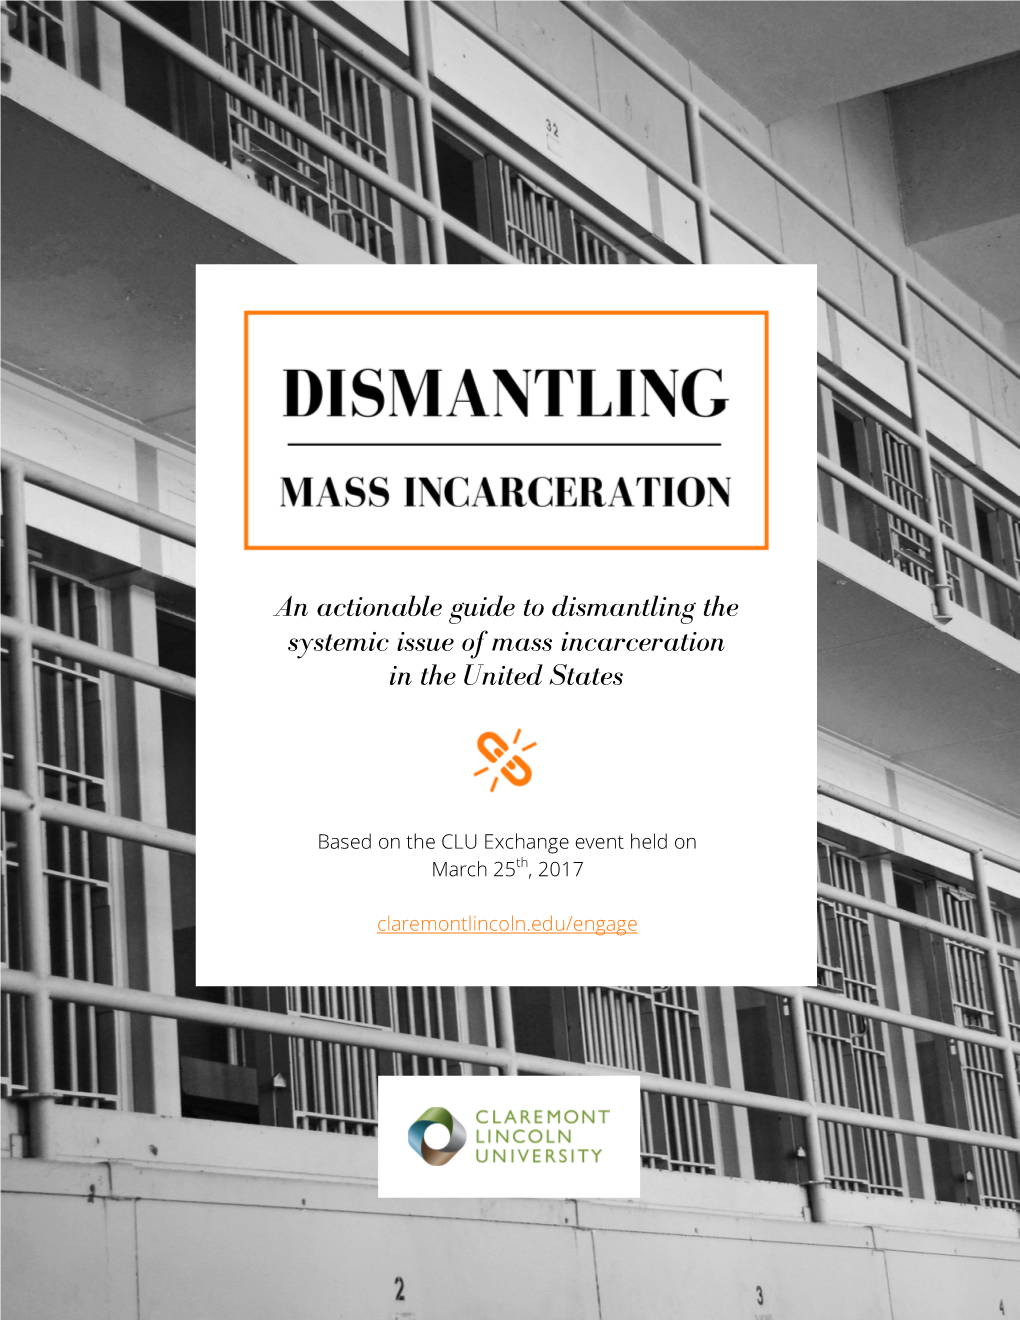 An Actionable Guide to Dismantling the Systemic Issue of Mass Incarceration in the United States